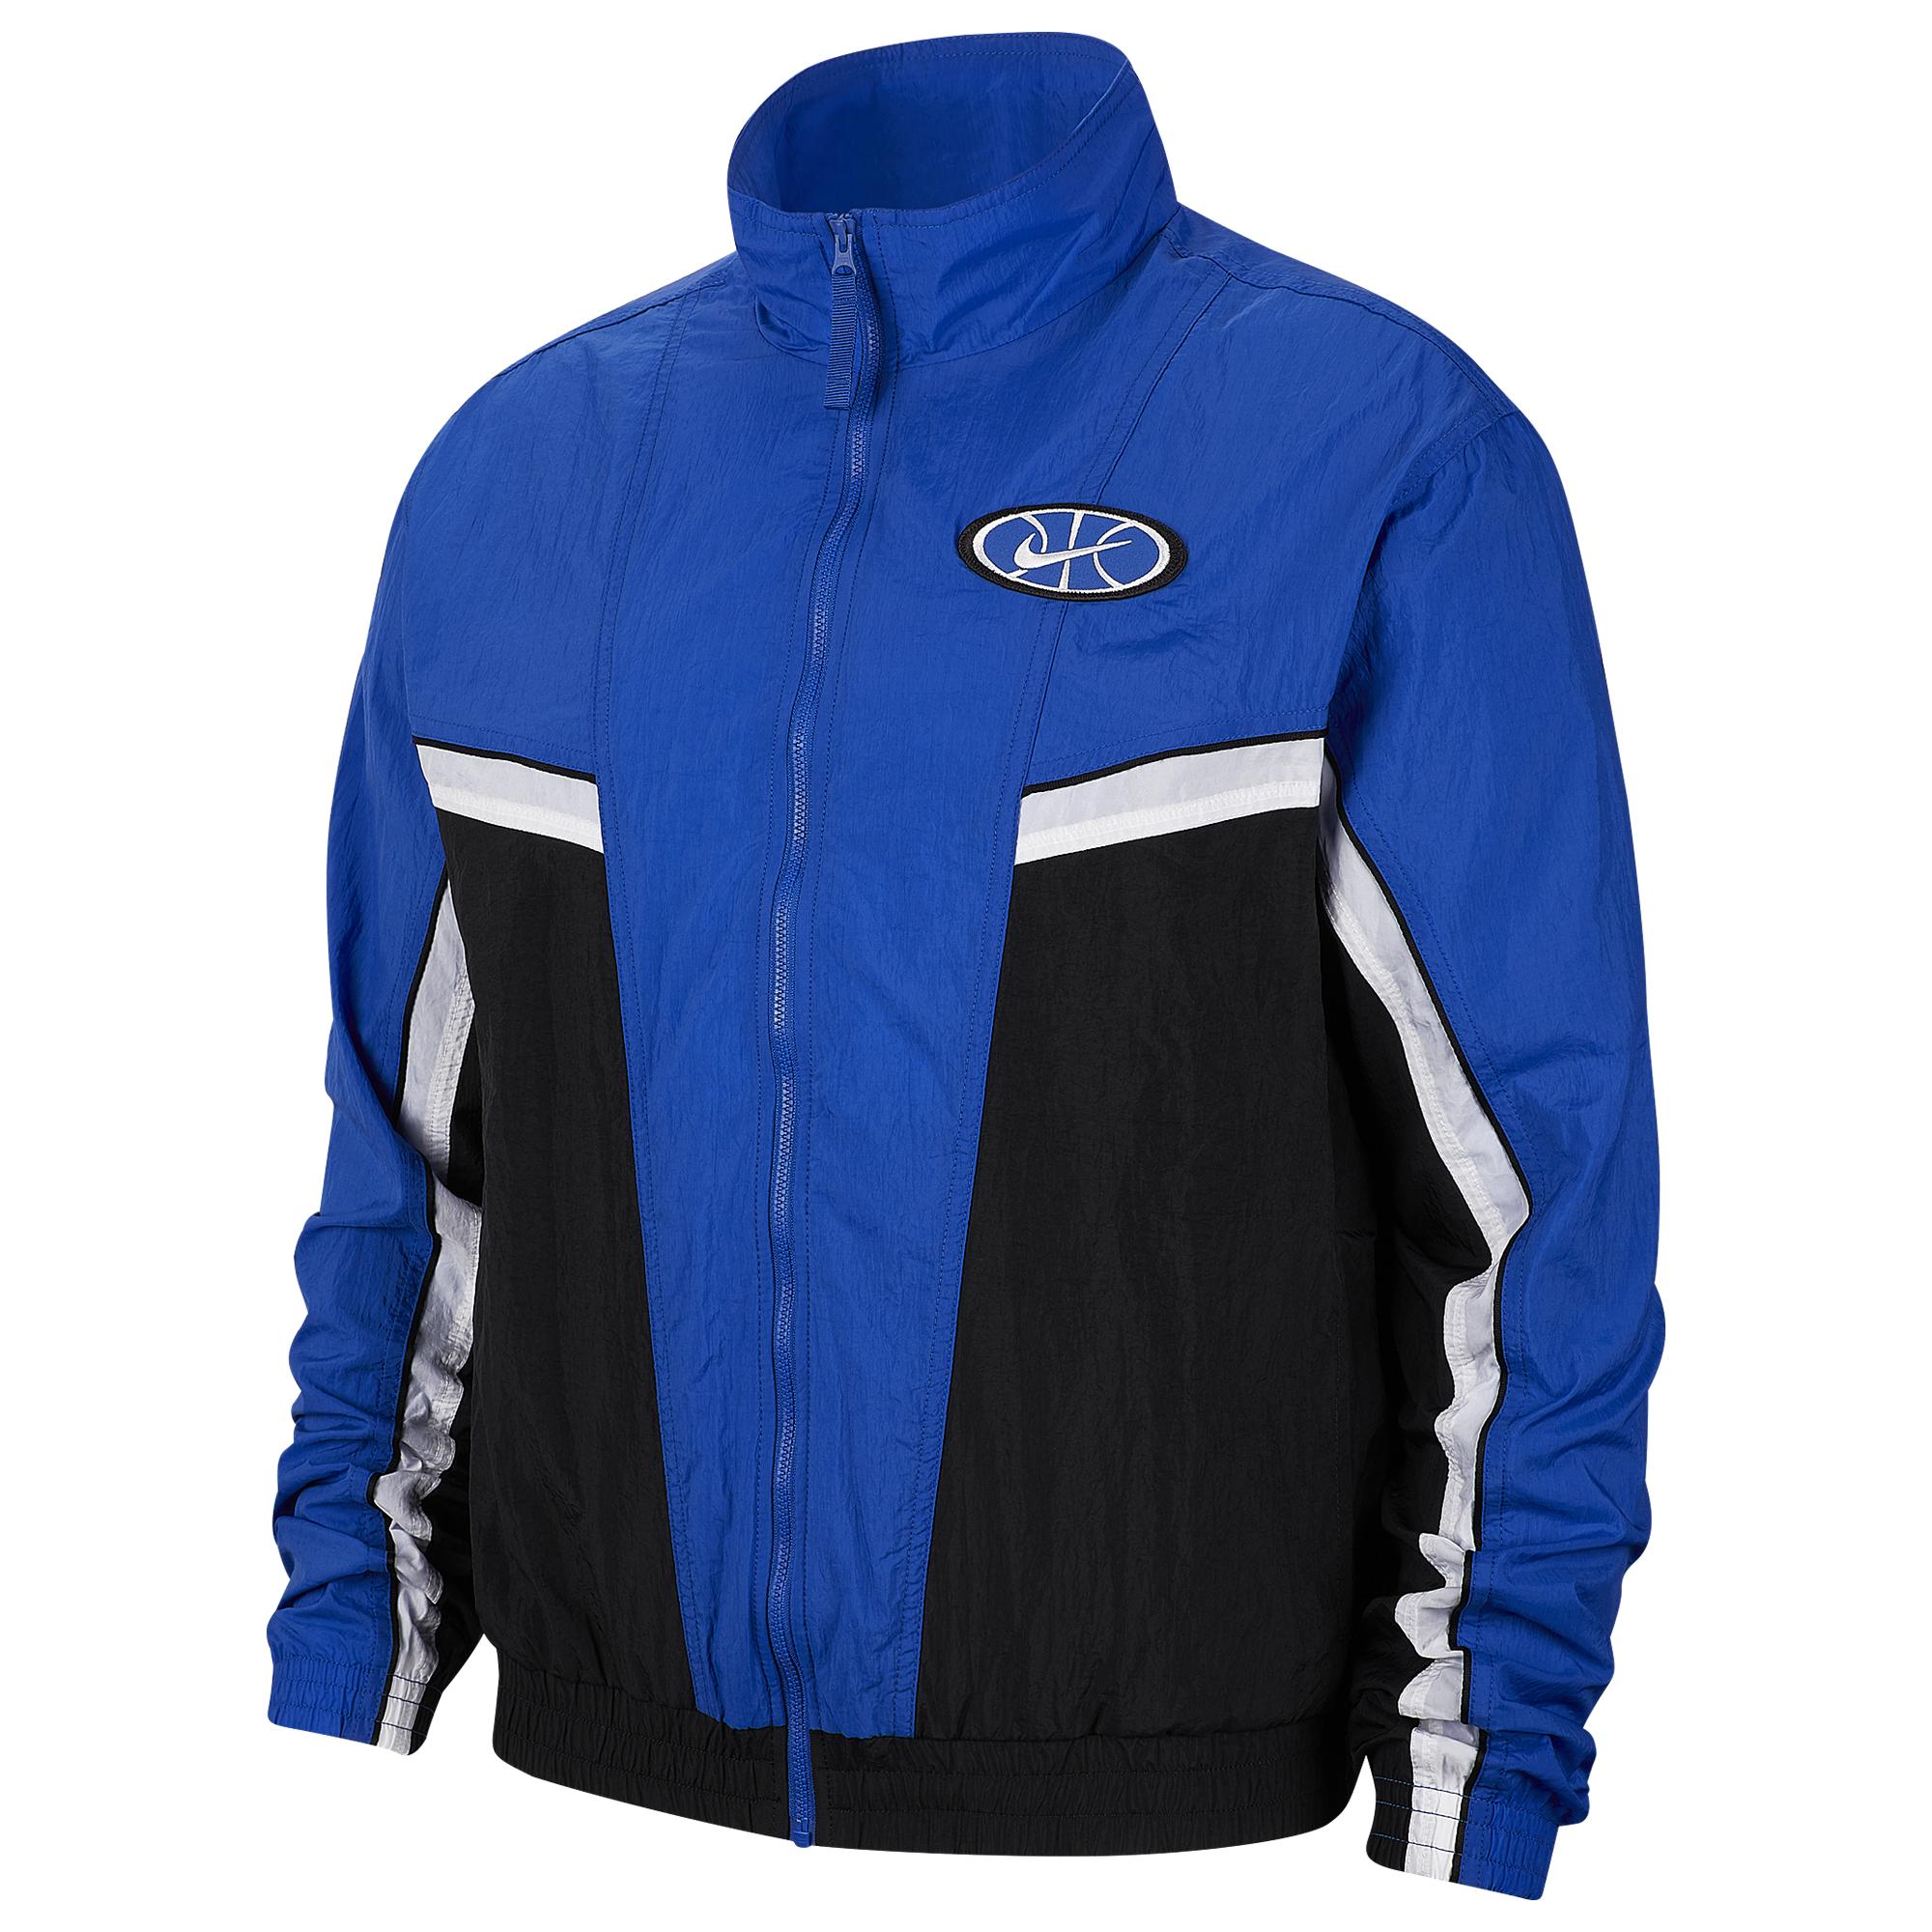 Nike Synthetic Throwback Woven Jacket in Blue for Men - Lyst